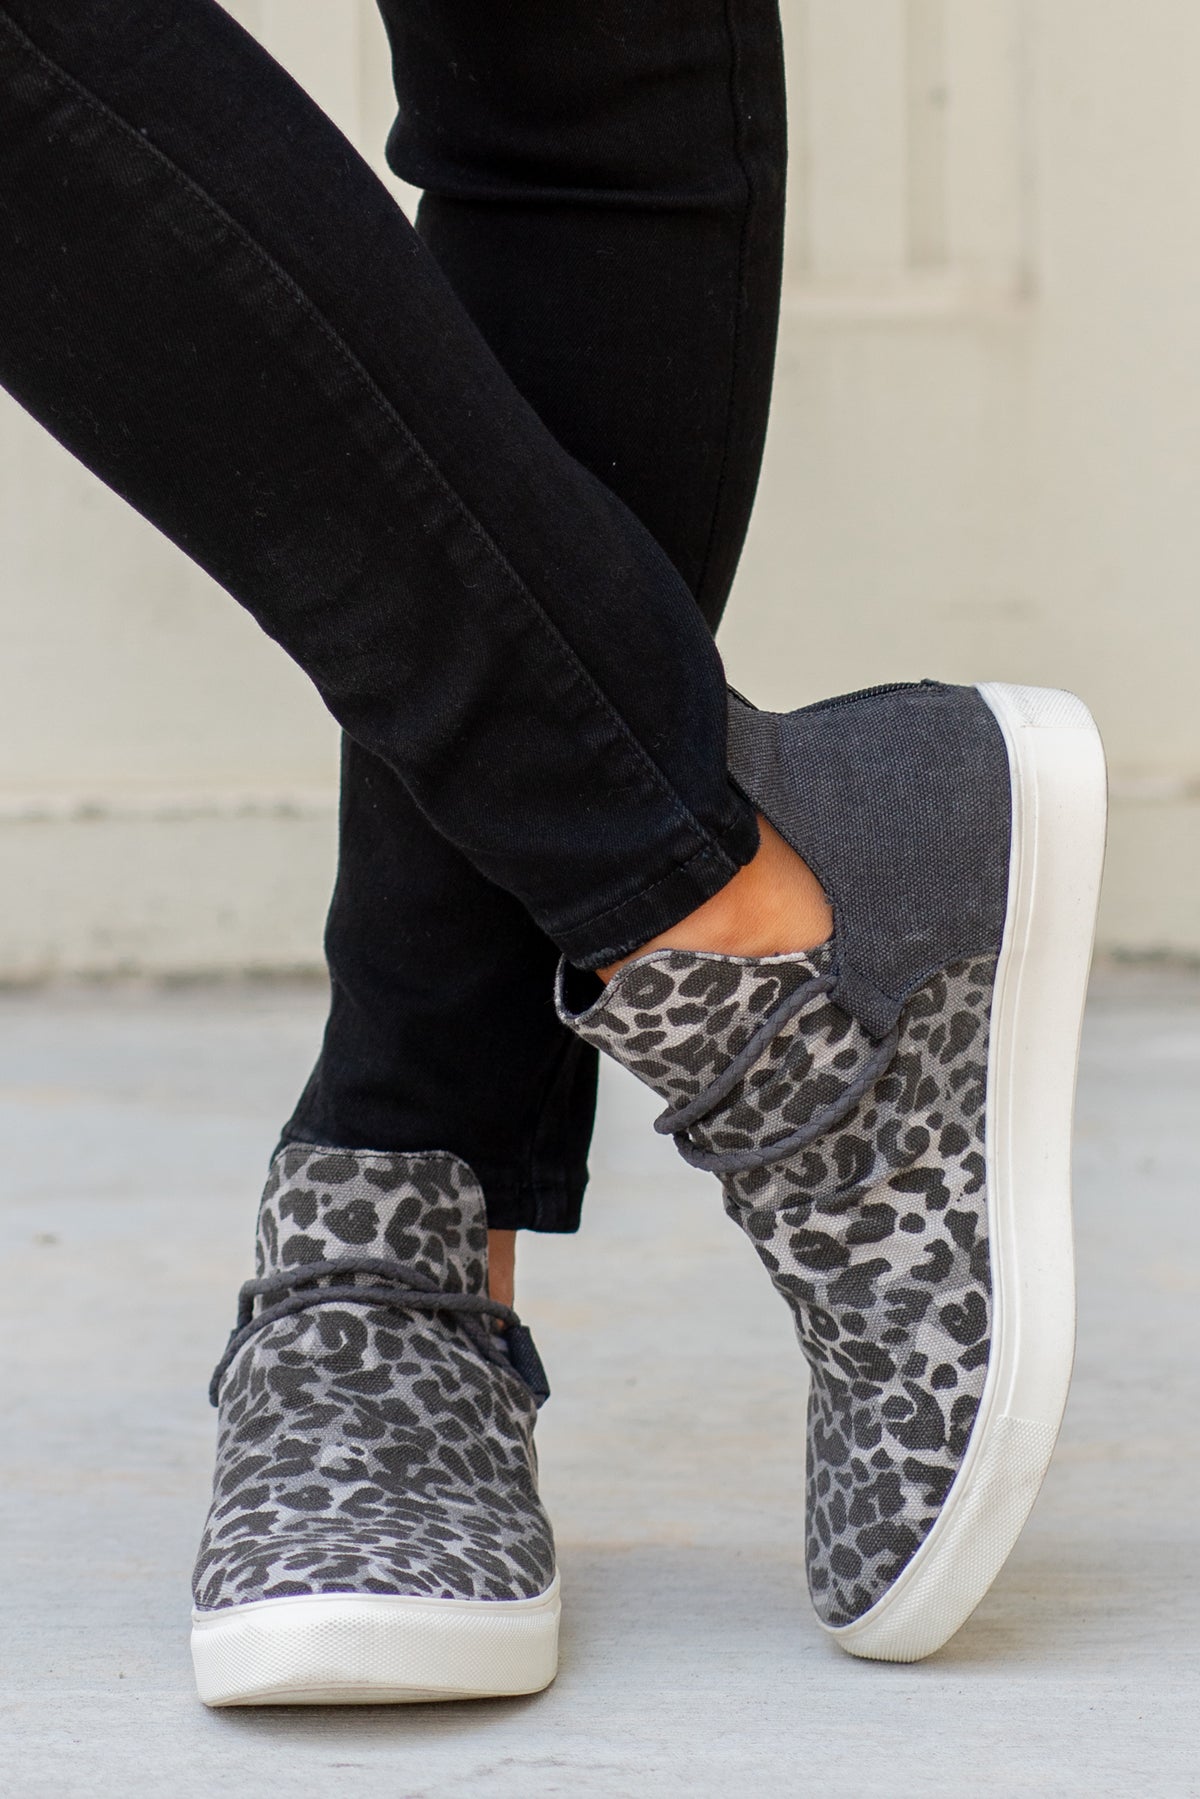 Sneakers | Very G  These sneakers from Very G are comfortable and bold. Style Name: Survivor Color: Leopard  Cut: Zip On Sneakers  Rubber Sole Style #: VGSP0080-Leopard Contact us for any additional measurements or sizing.   